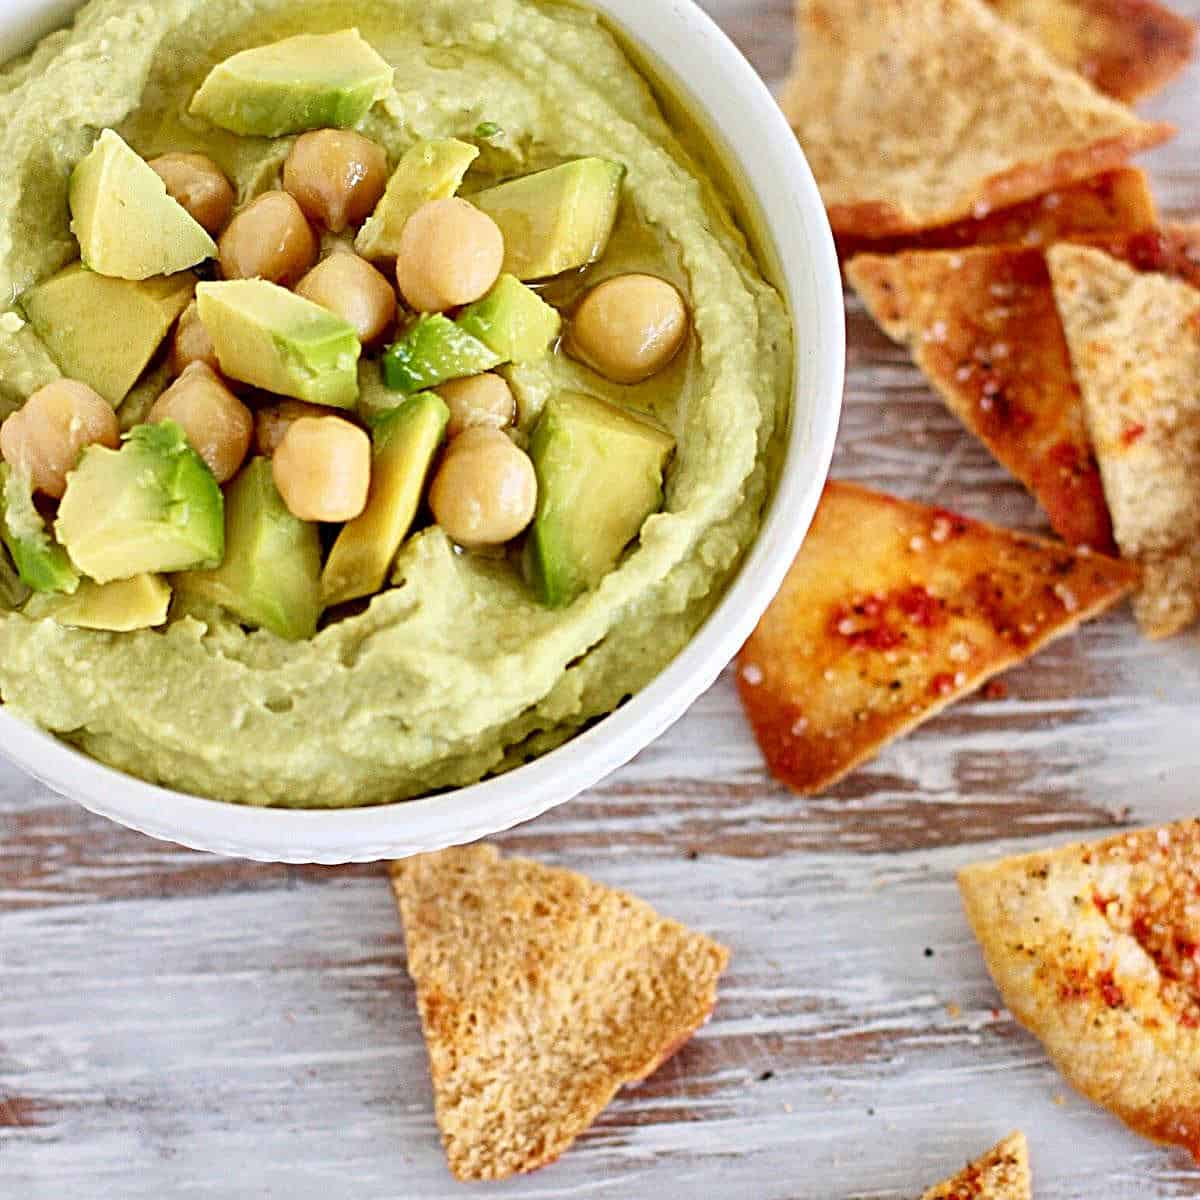 Avocado hummus dip in a white bowl with chickpeas, avocado dice, and pita chips. White wooden surface.